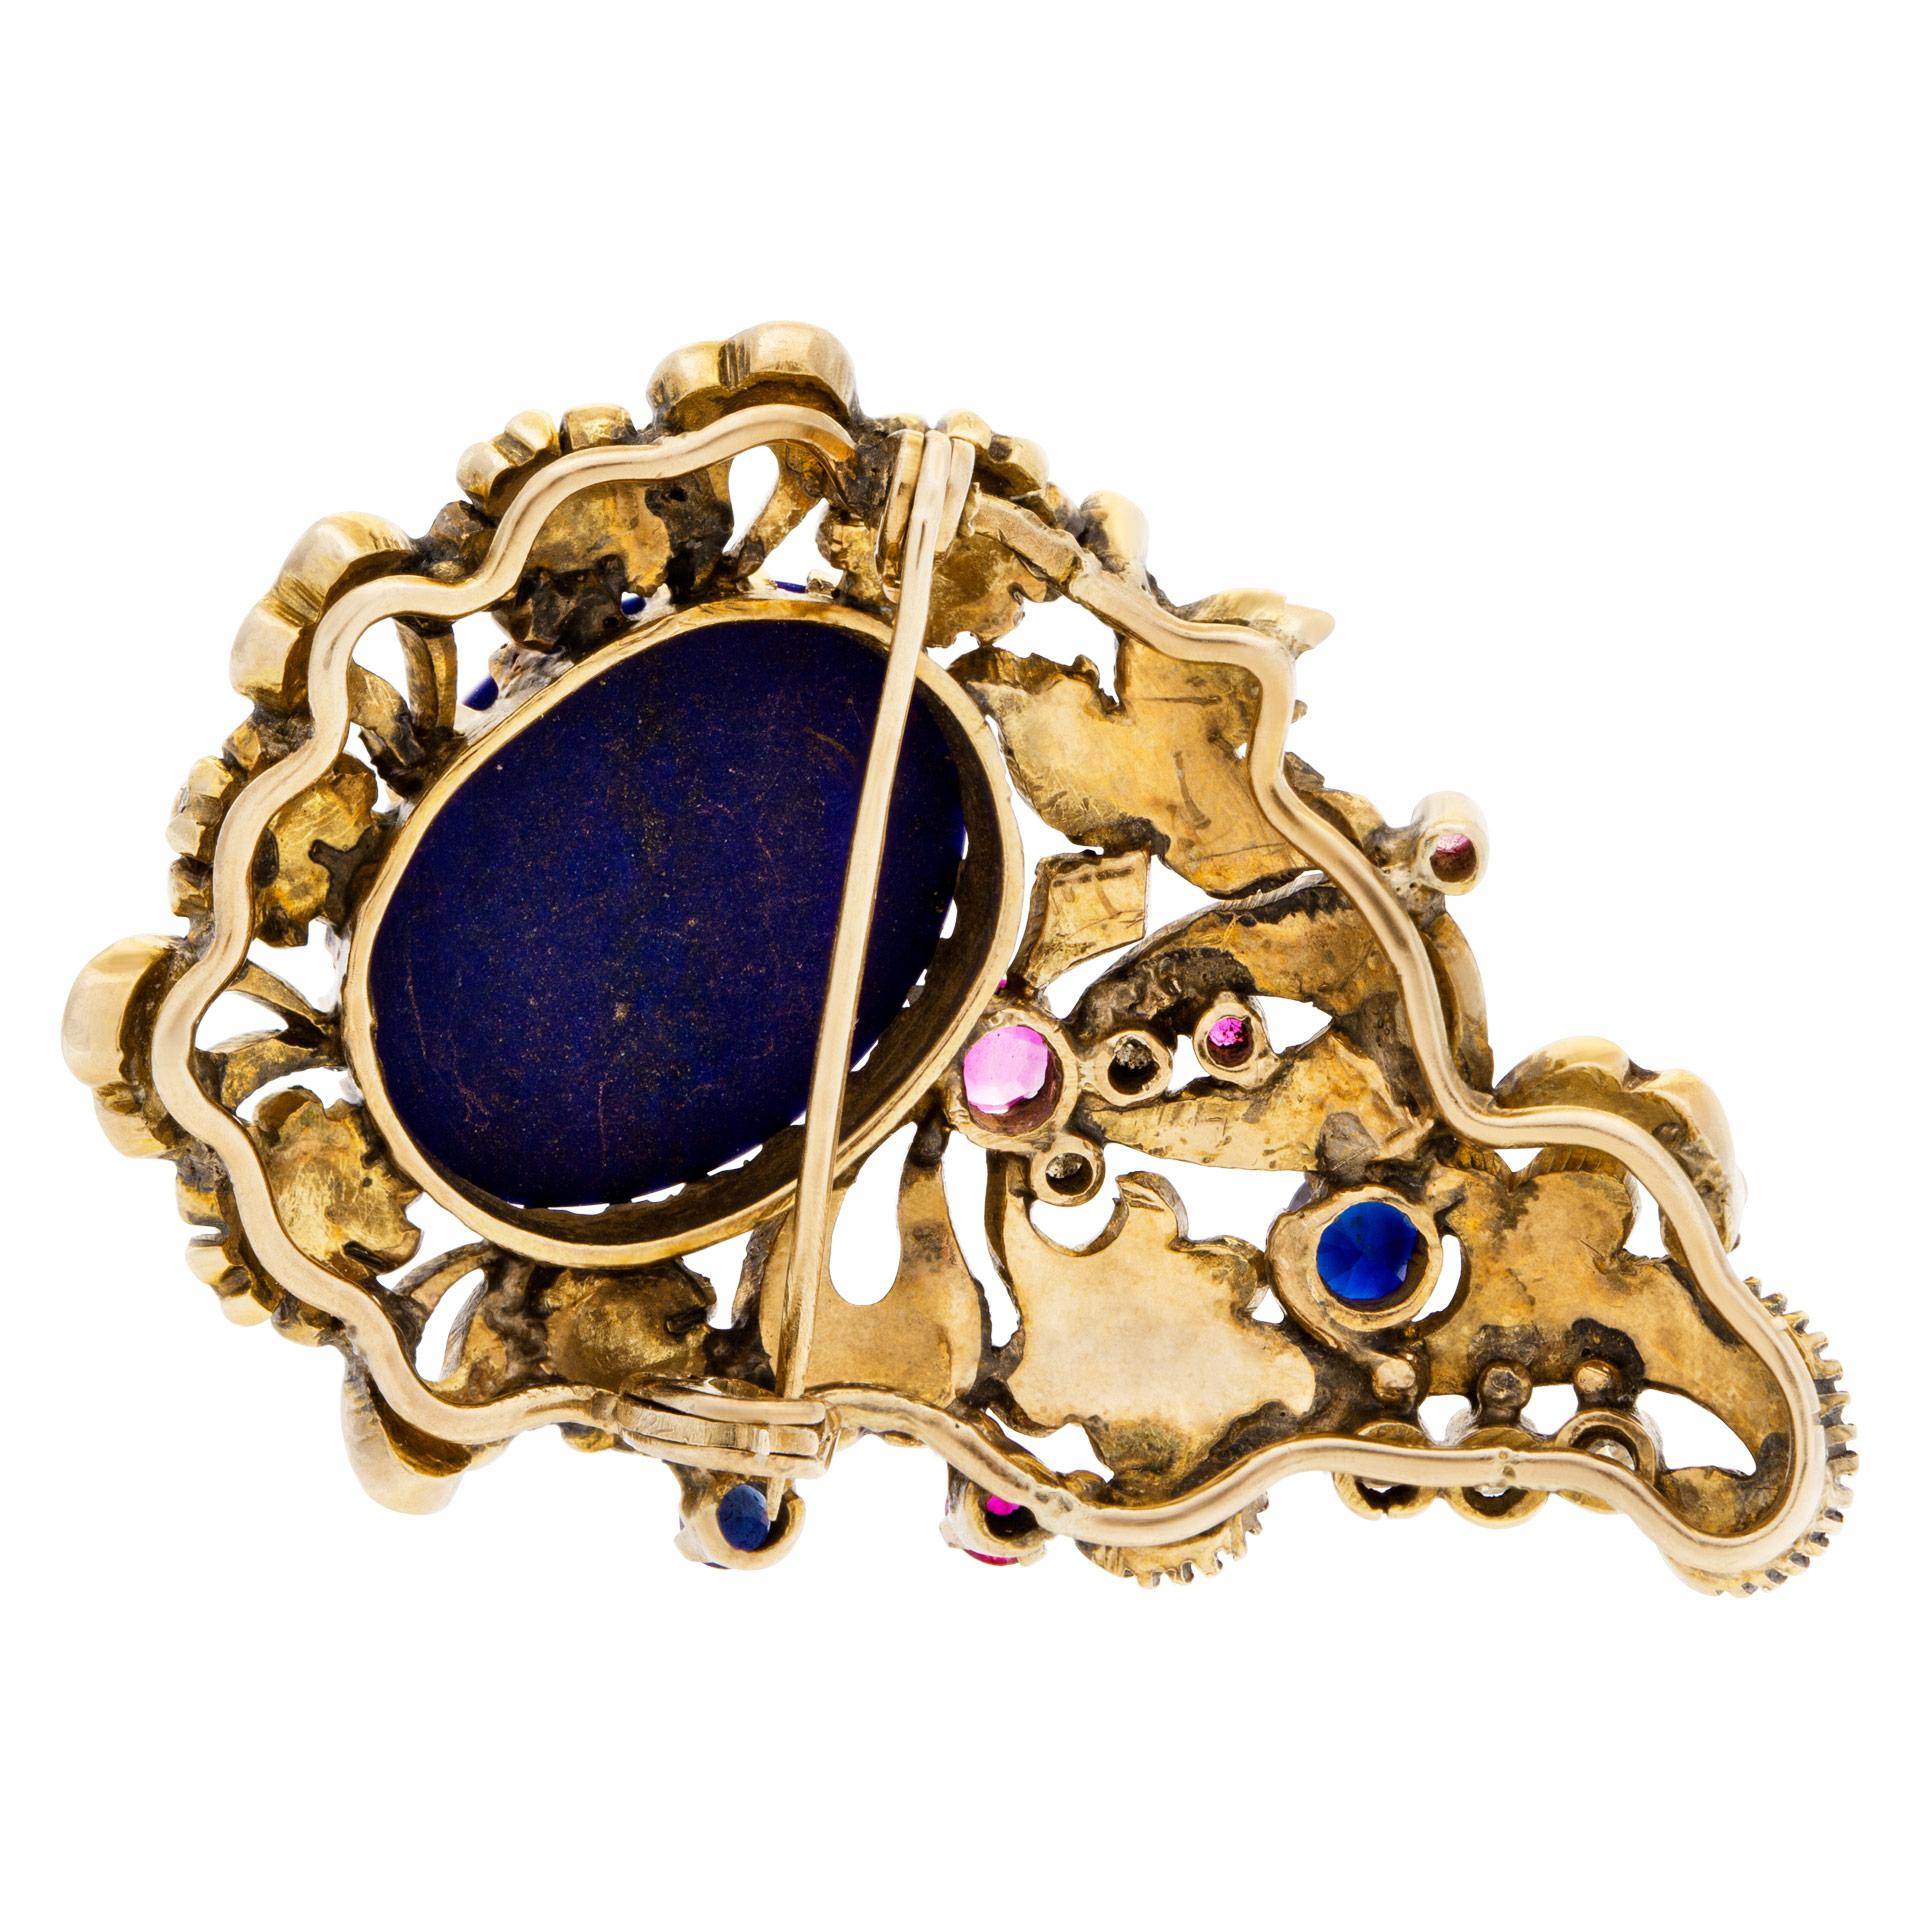 ESTIMATED RETAIL: $5,400 YOUR PRICE: $3,540 - Antique Brooch with cabochon lapis lazuli center and rose & cushion cut diamonds set in 14K gold. Secured C clasp dates the brooch prior to 1900. 4 little rubies, blue sapphire, some black enamel